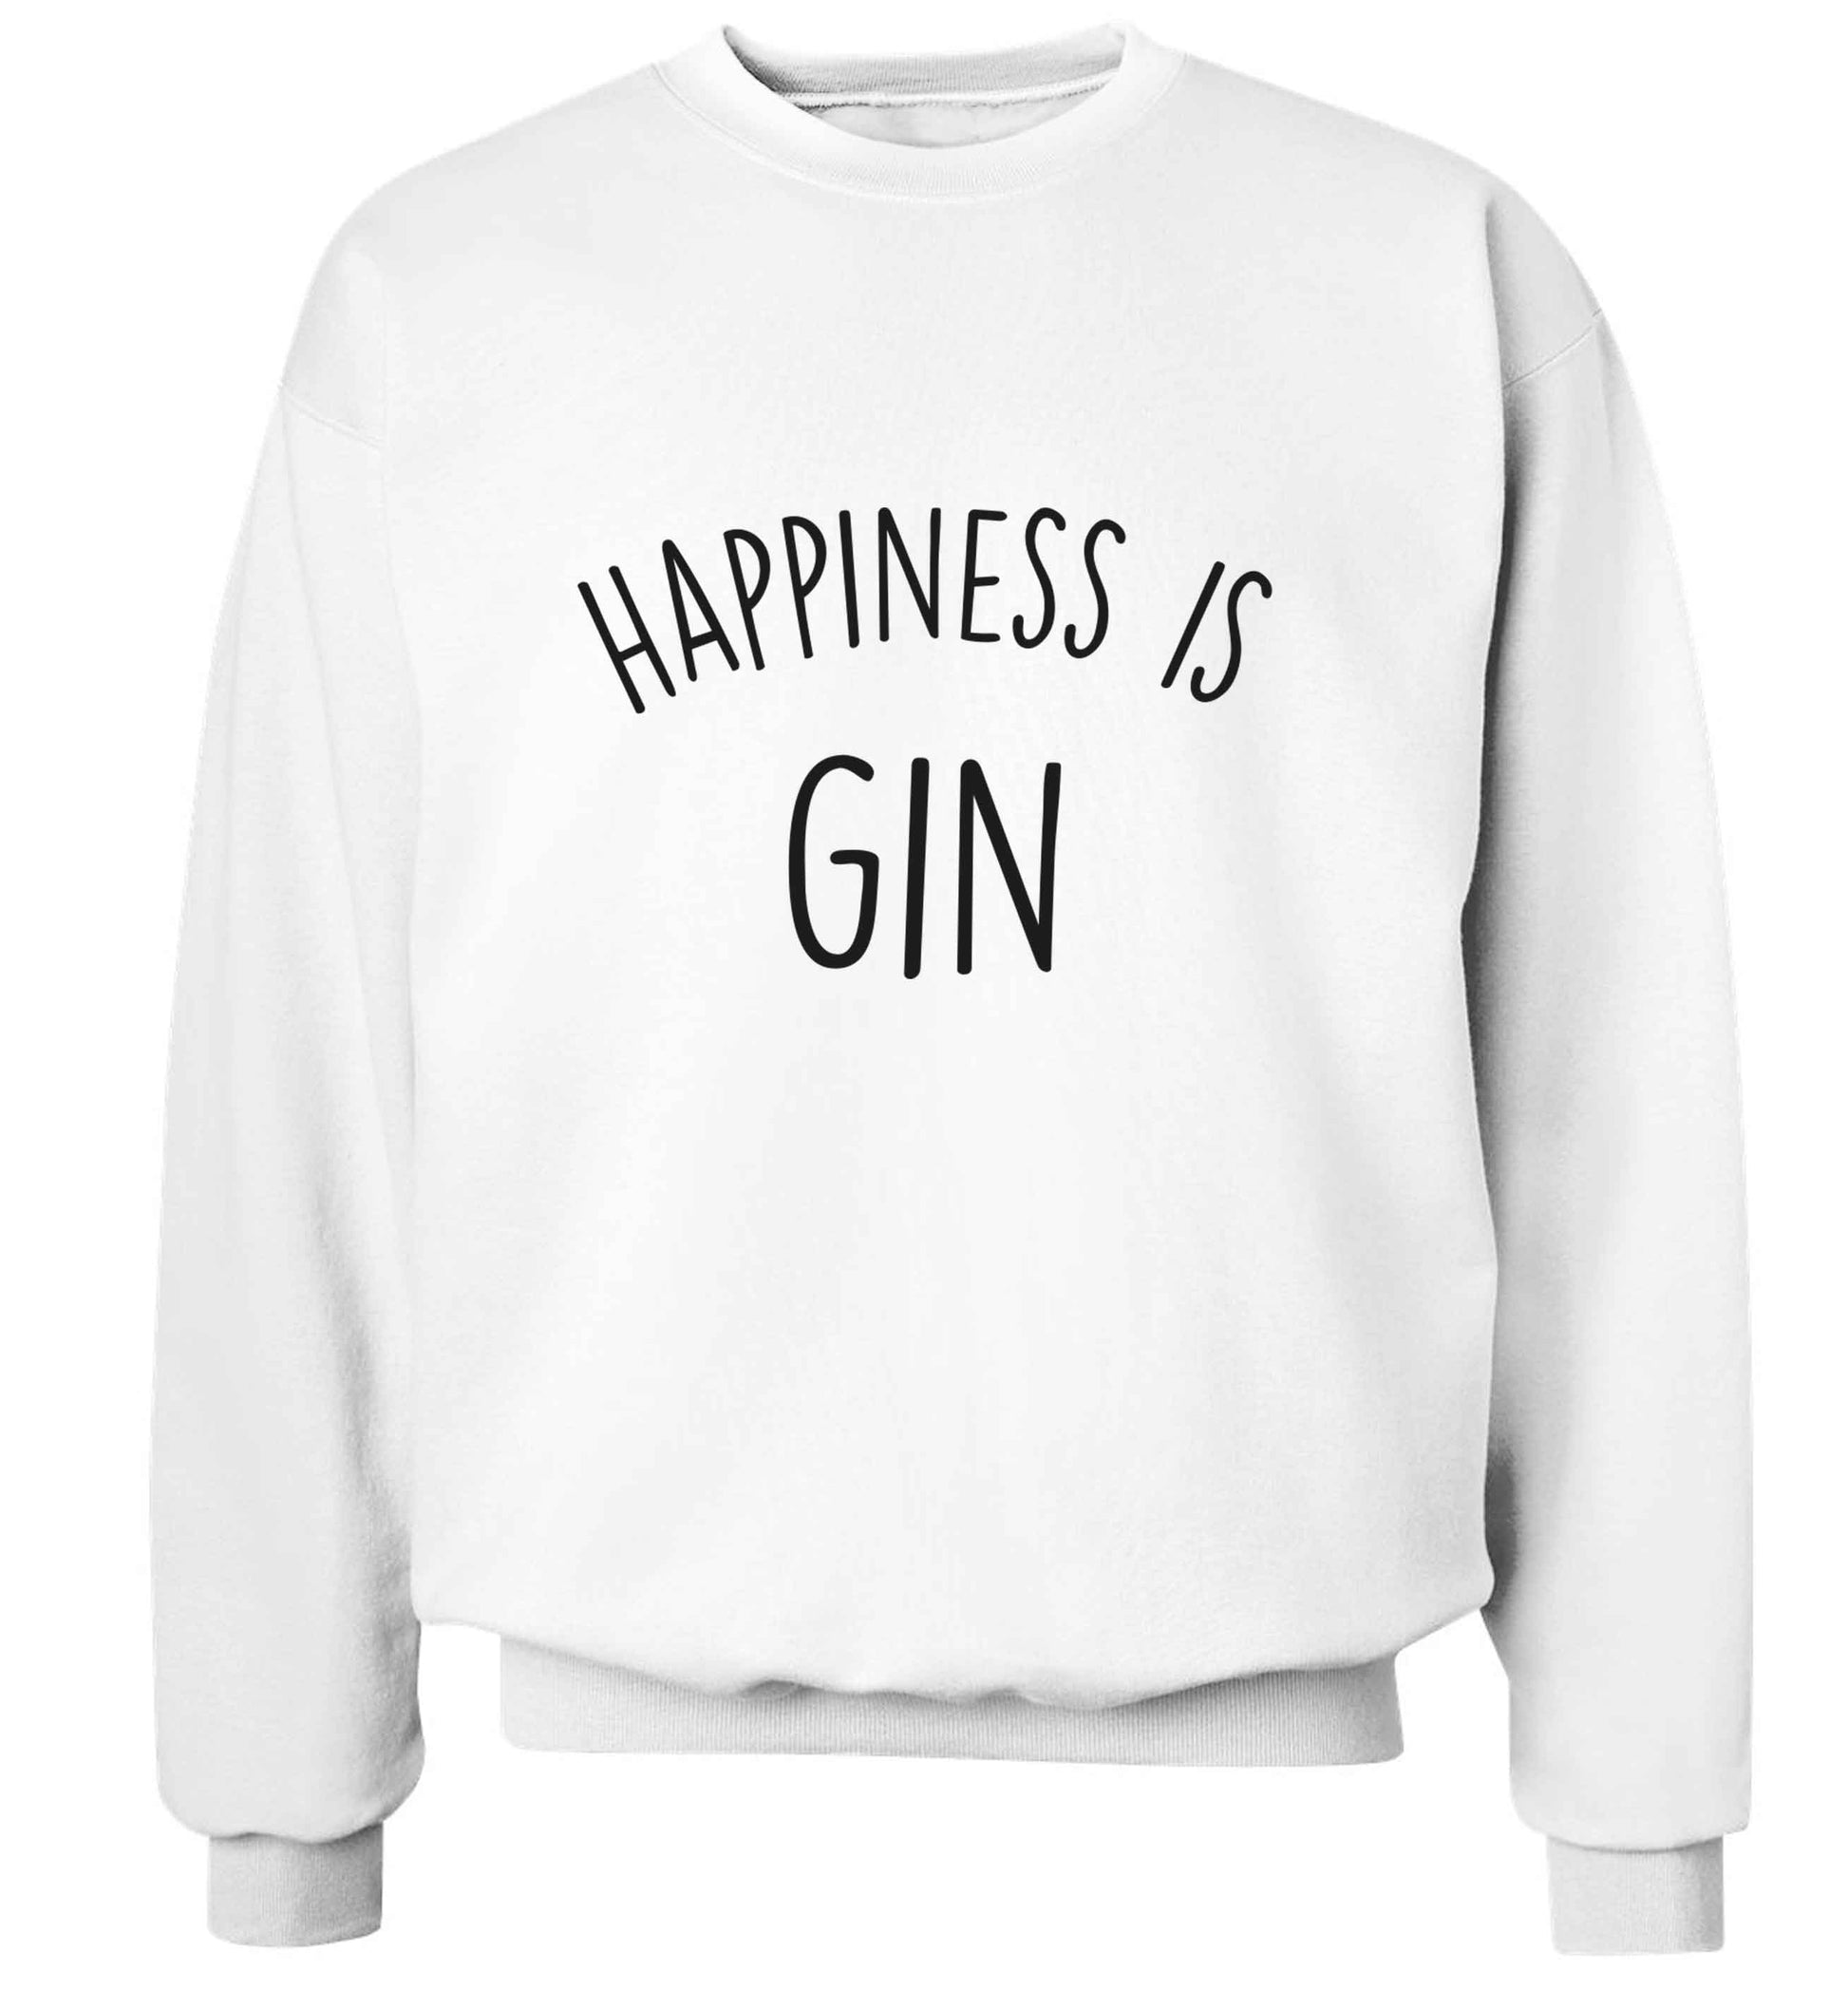 Happiness is gin adult's unisex white sweater 2XL